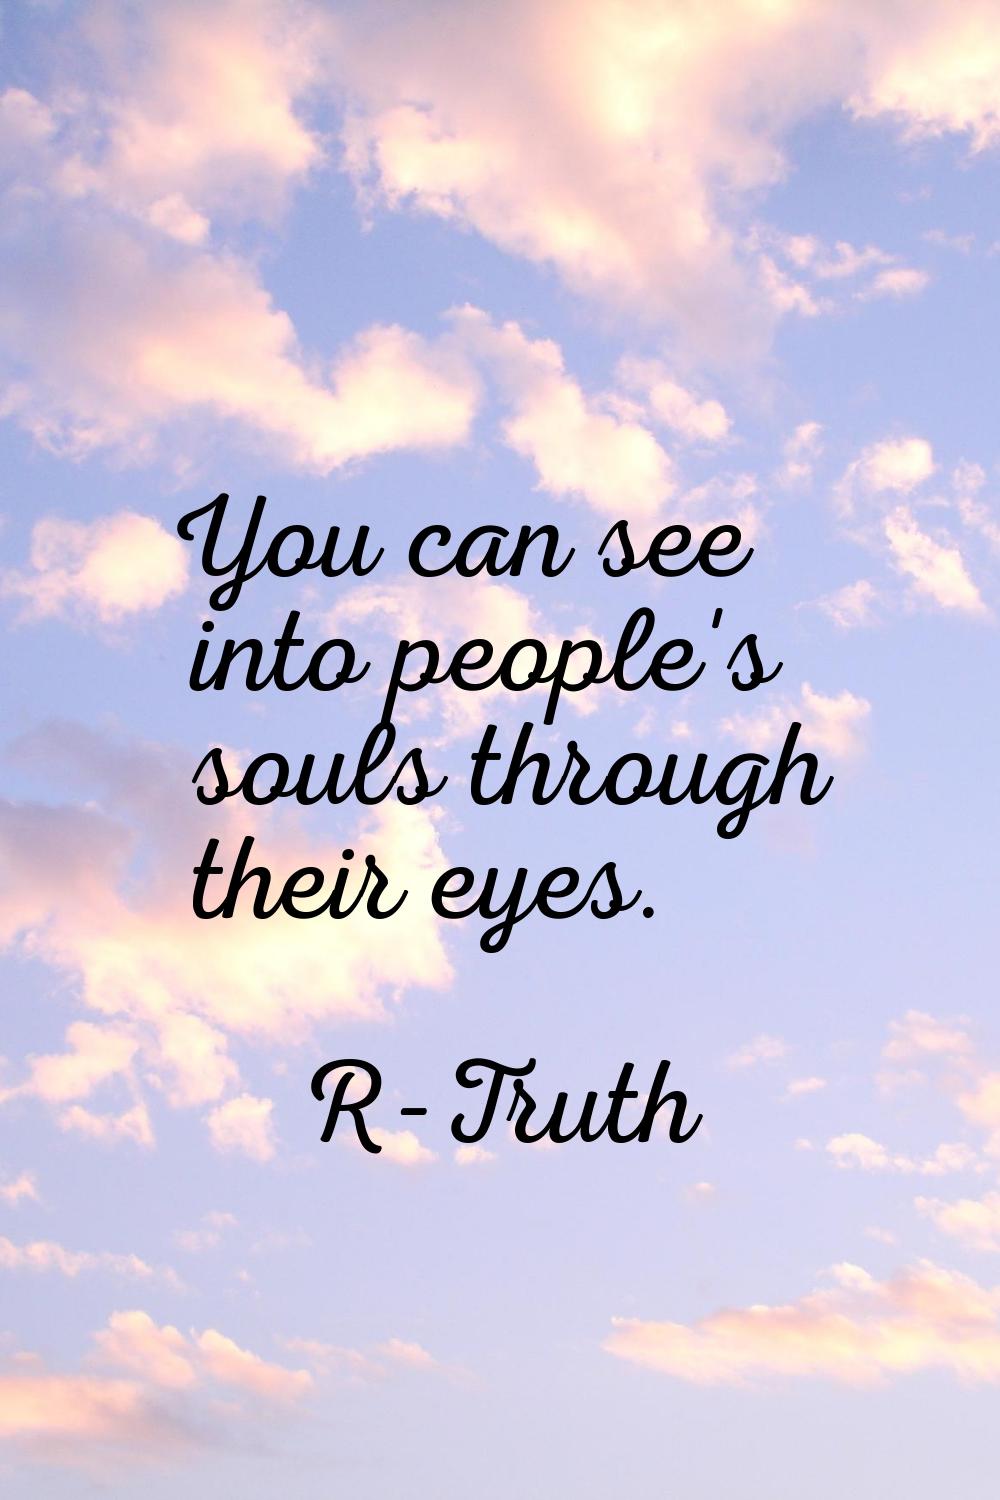 You can see into people's souls through their eyes.